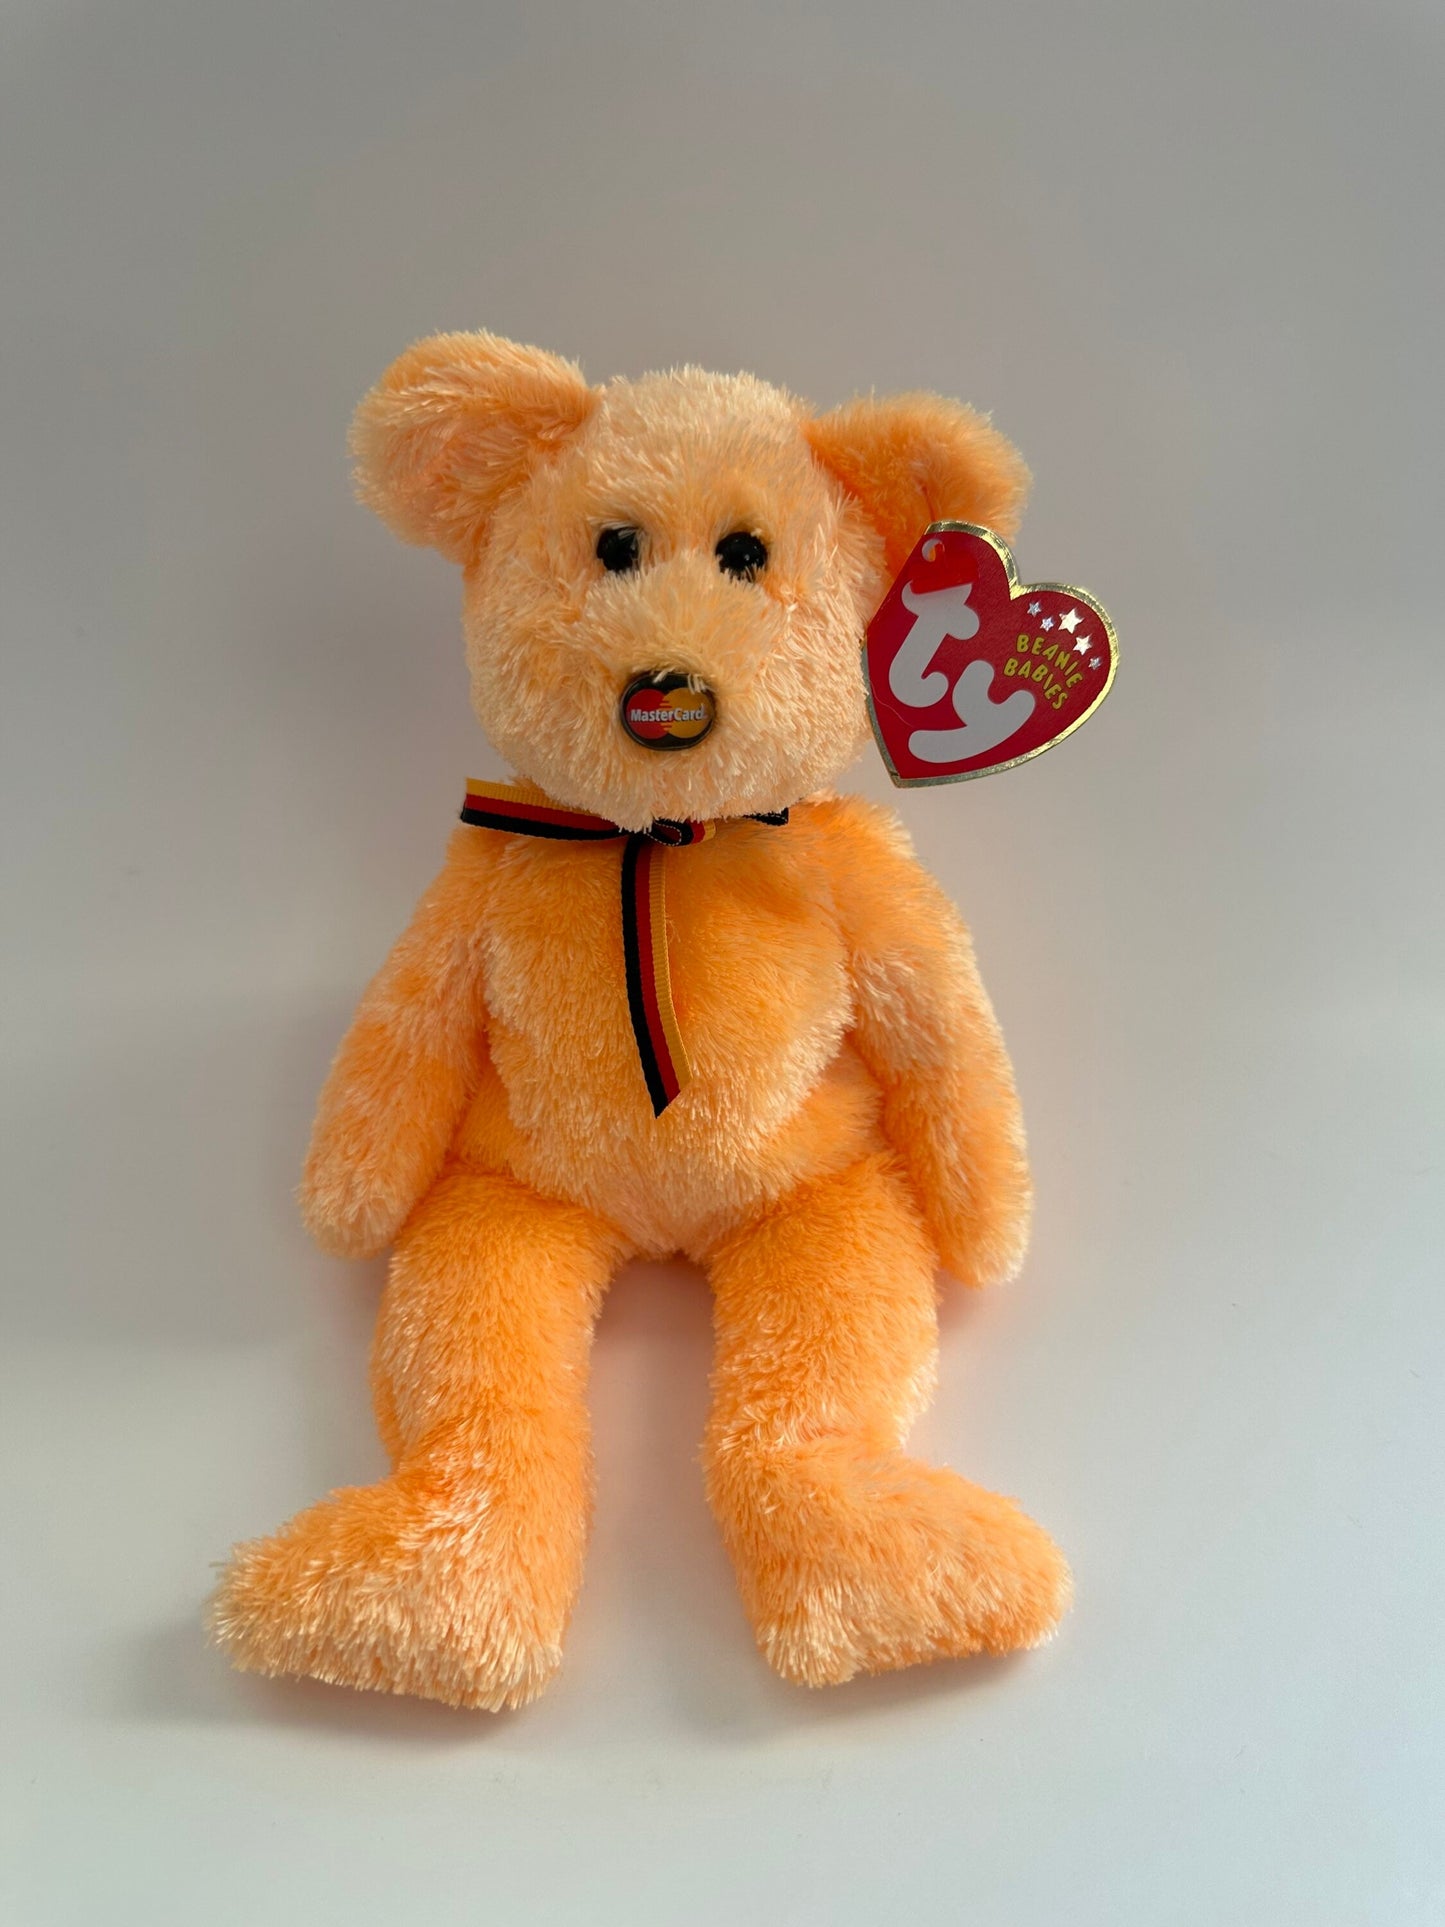 Ty Beanie Baby “M.C. Beanie II” the MasterCard Bear- Credit Card Exclusive (8.5 inch)